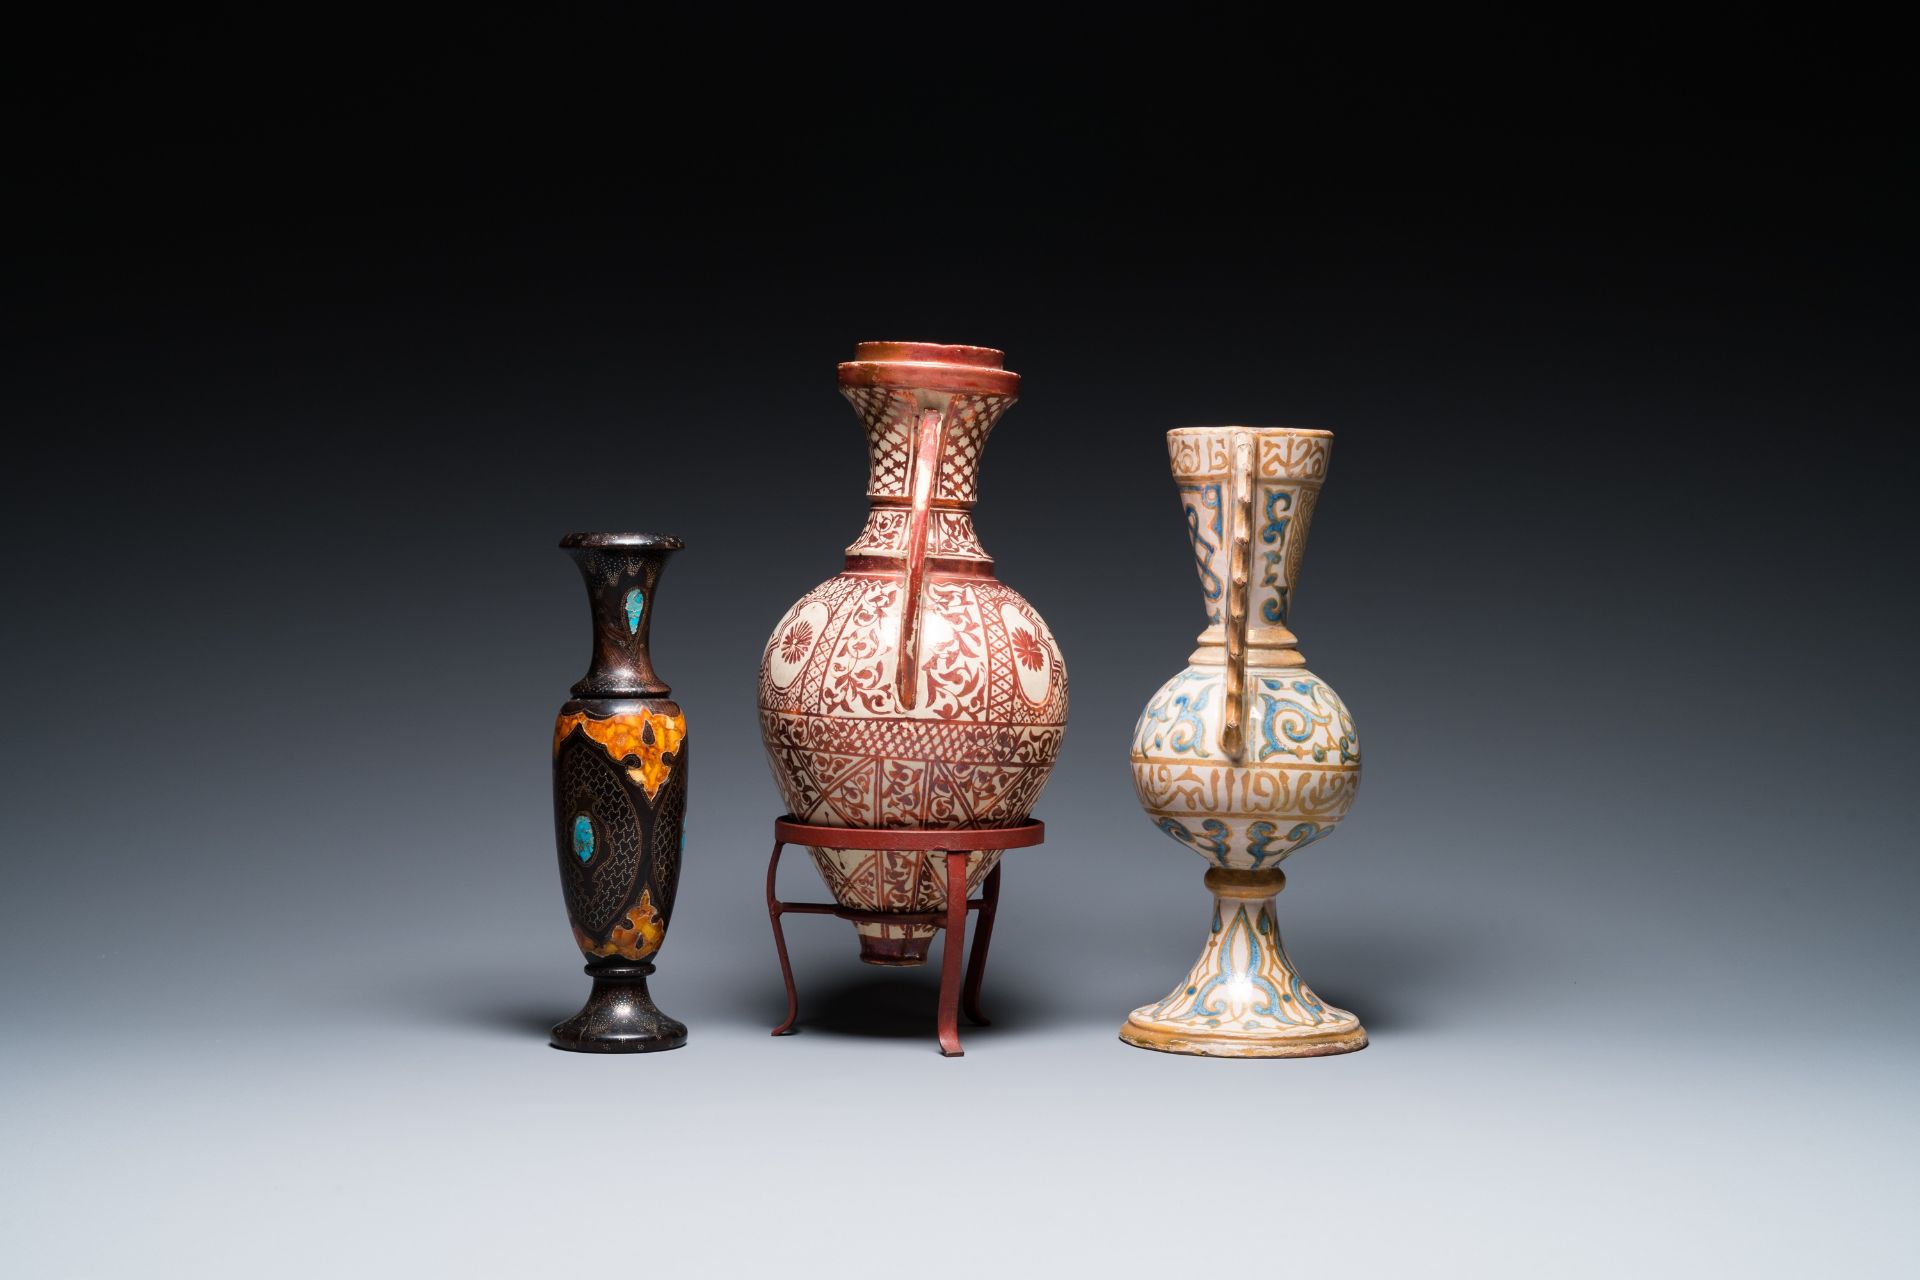 Two Hispano-Moresque lustre-glazed 'Alhambra' vases and a stone-inlaid wooden vase, Spain and Northe - Image 2 of 6